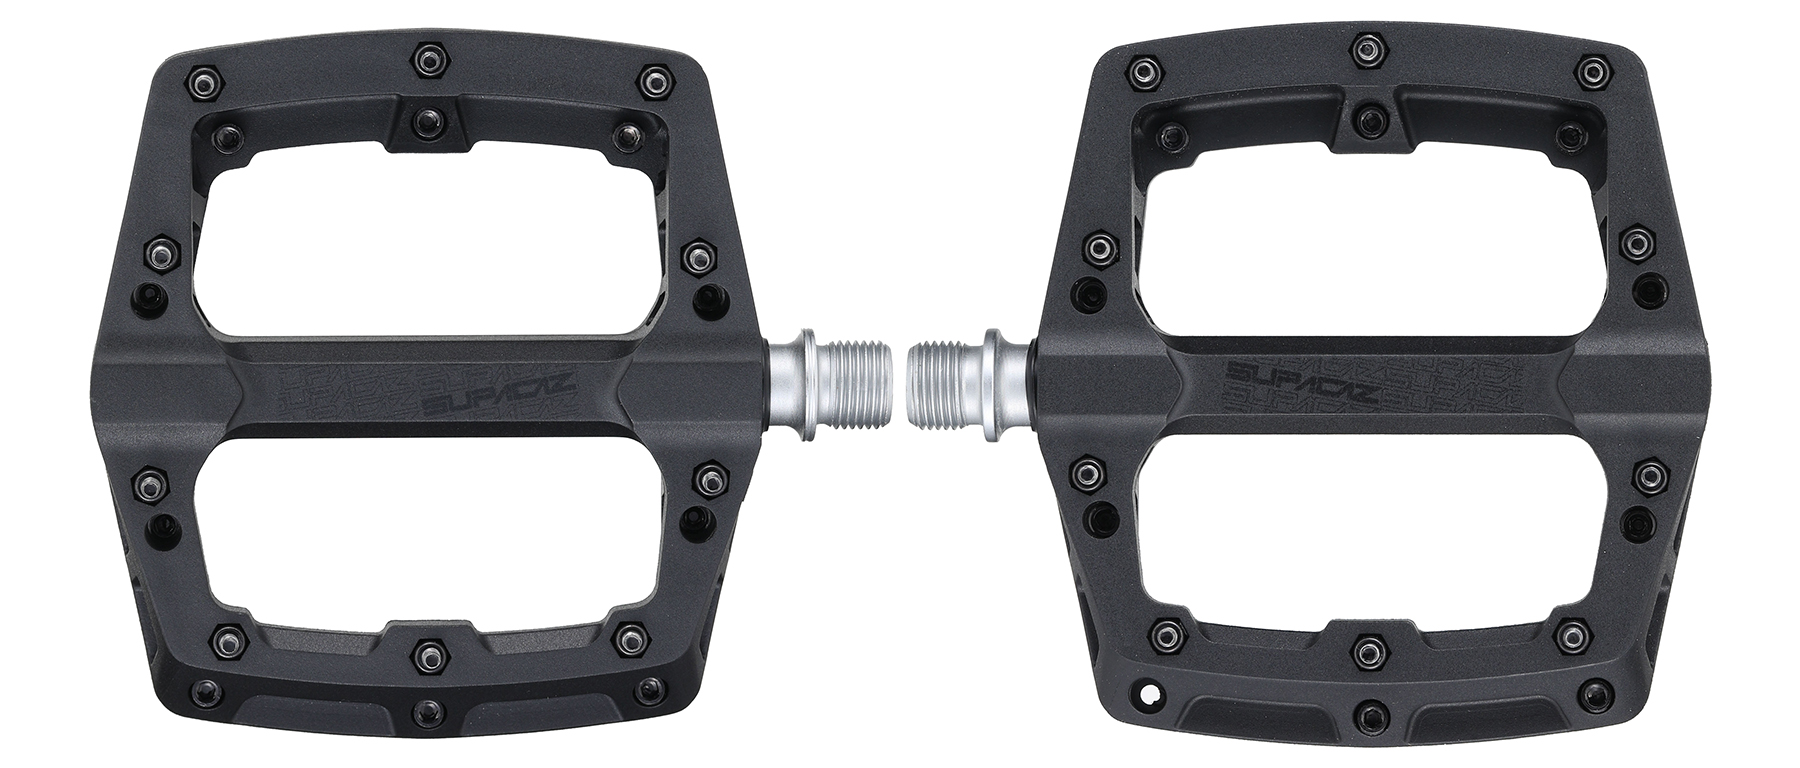 Specialized Smash Thermopoly Pedals